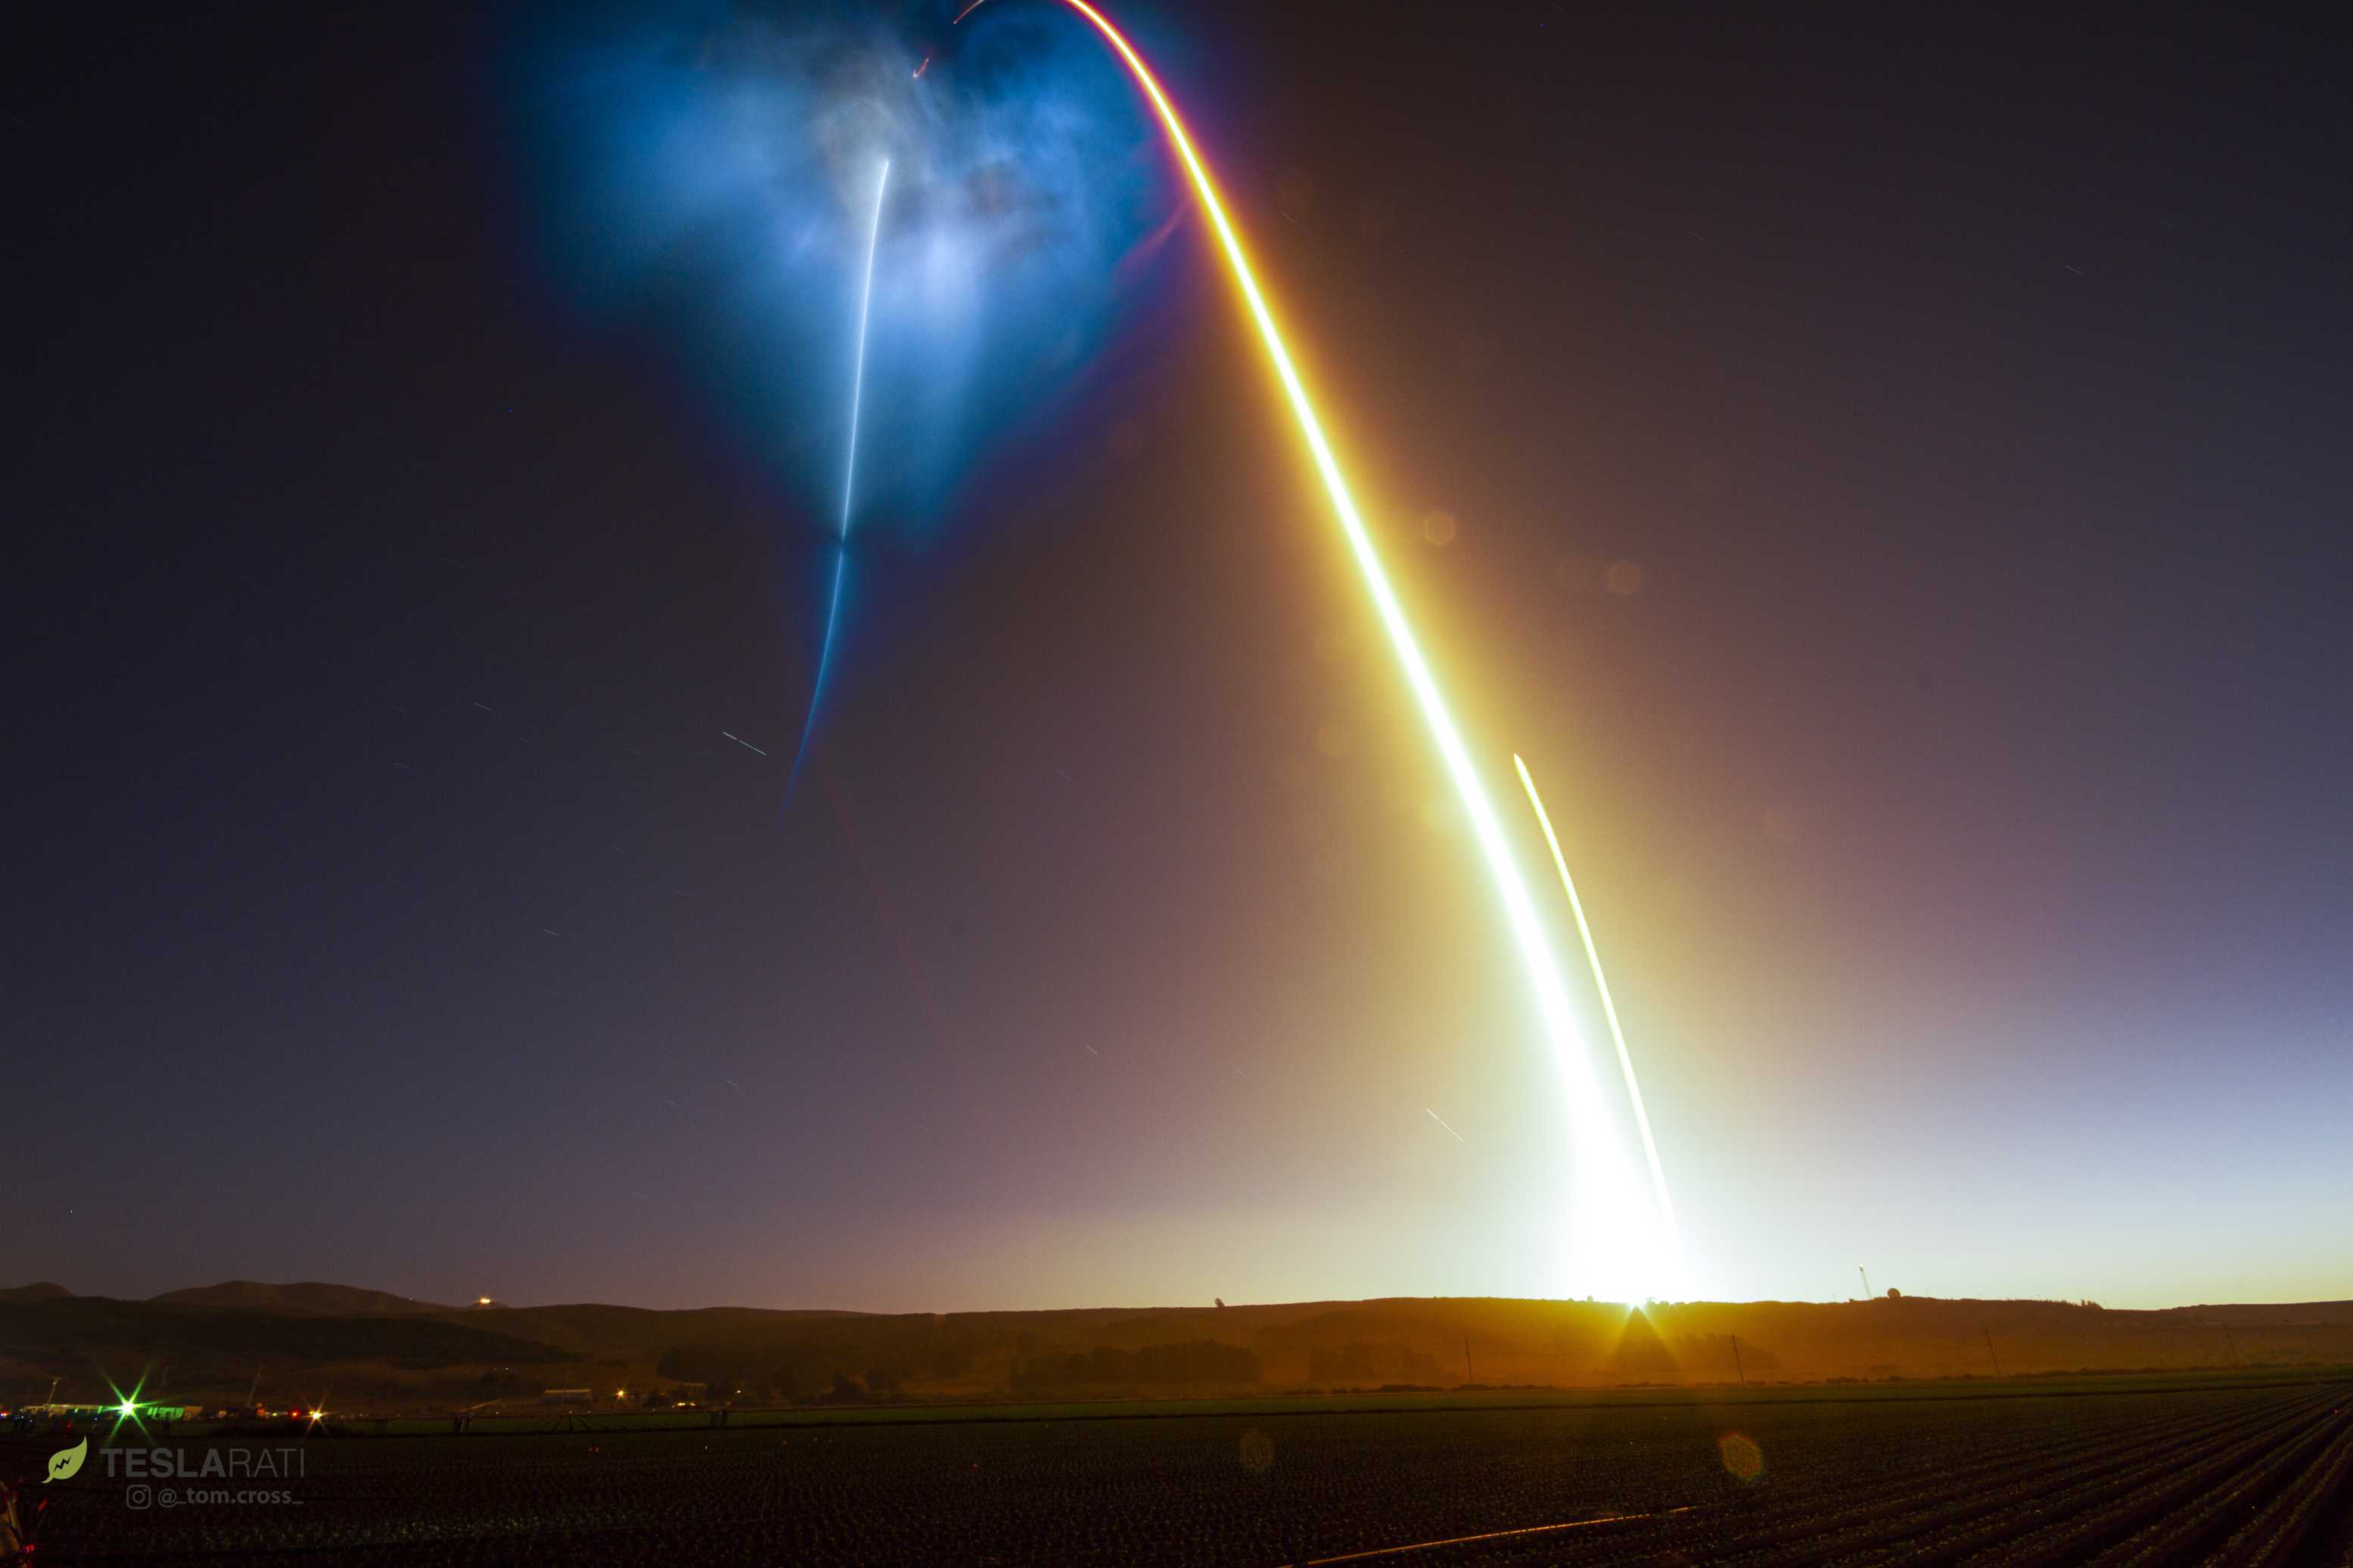 spacex falcon 9 rocket launched and its brilliant light over